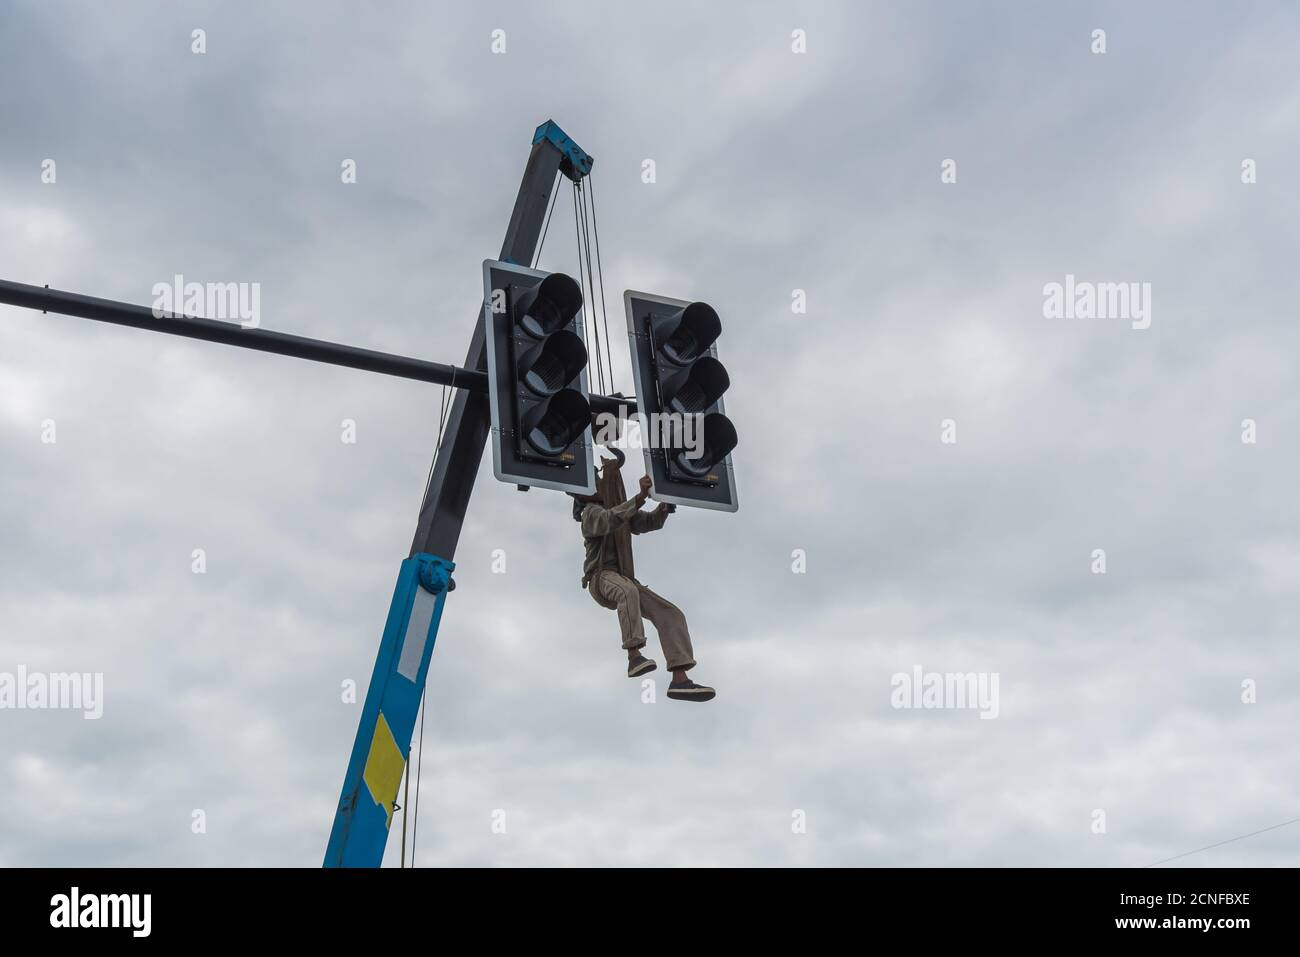 The repair team of electricians troubleshoots governing the traffic lights at the intersection. Stock Photo